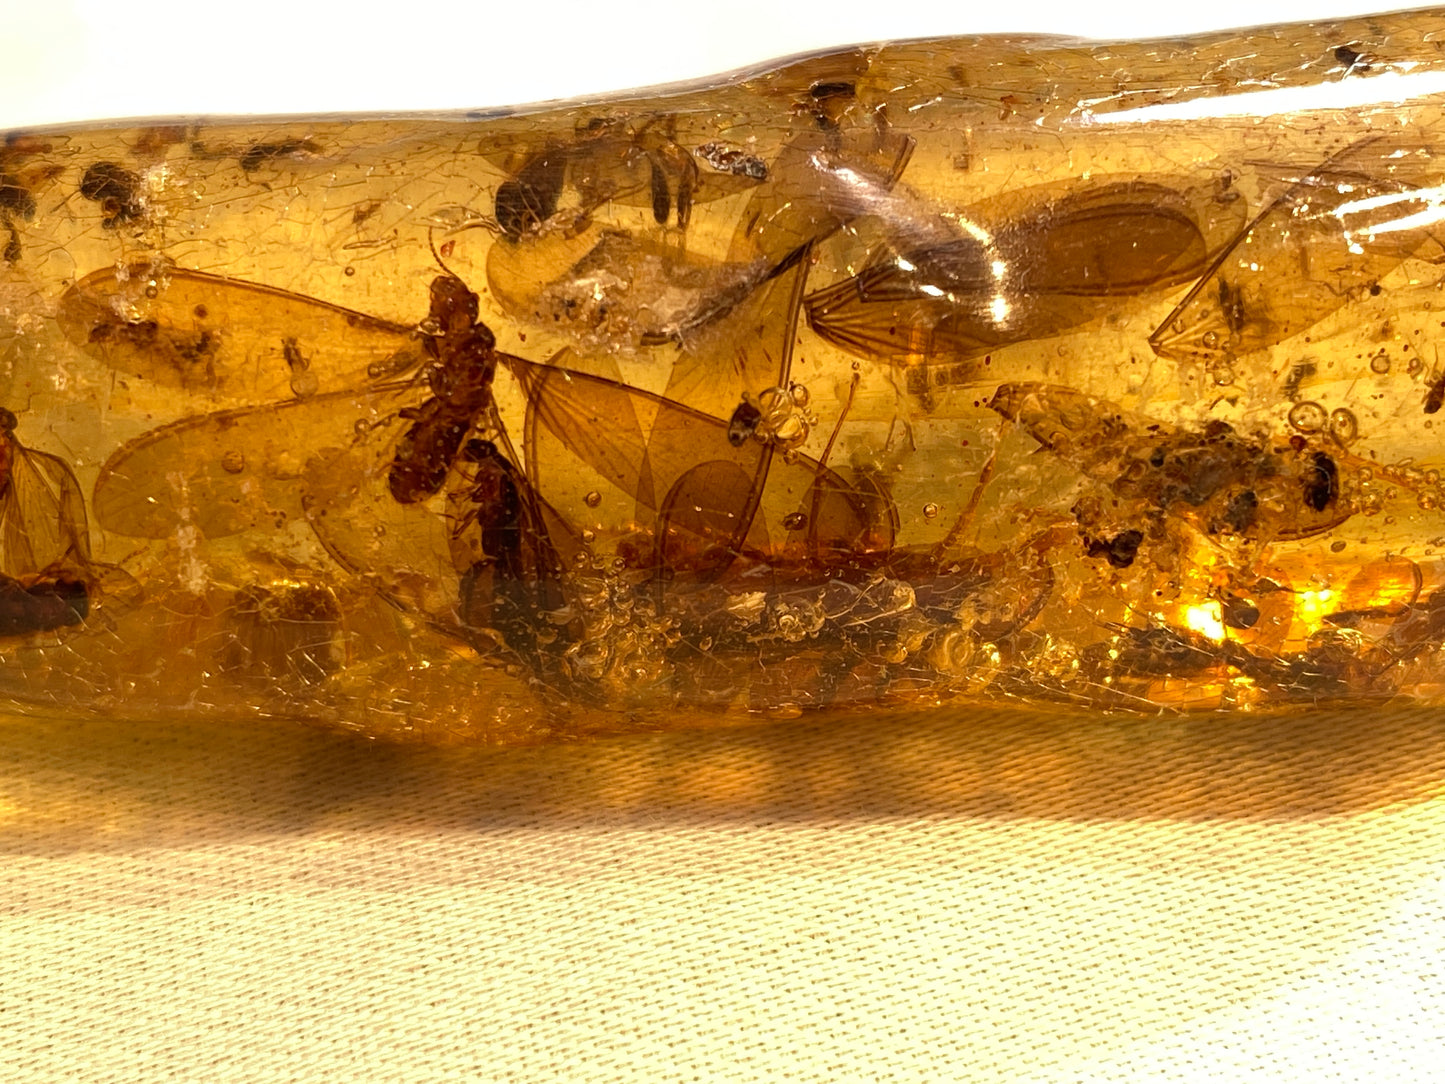 Copal with insects, Santander, Columbia